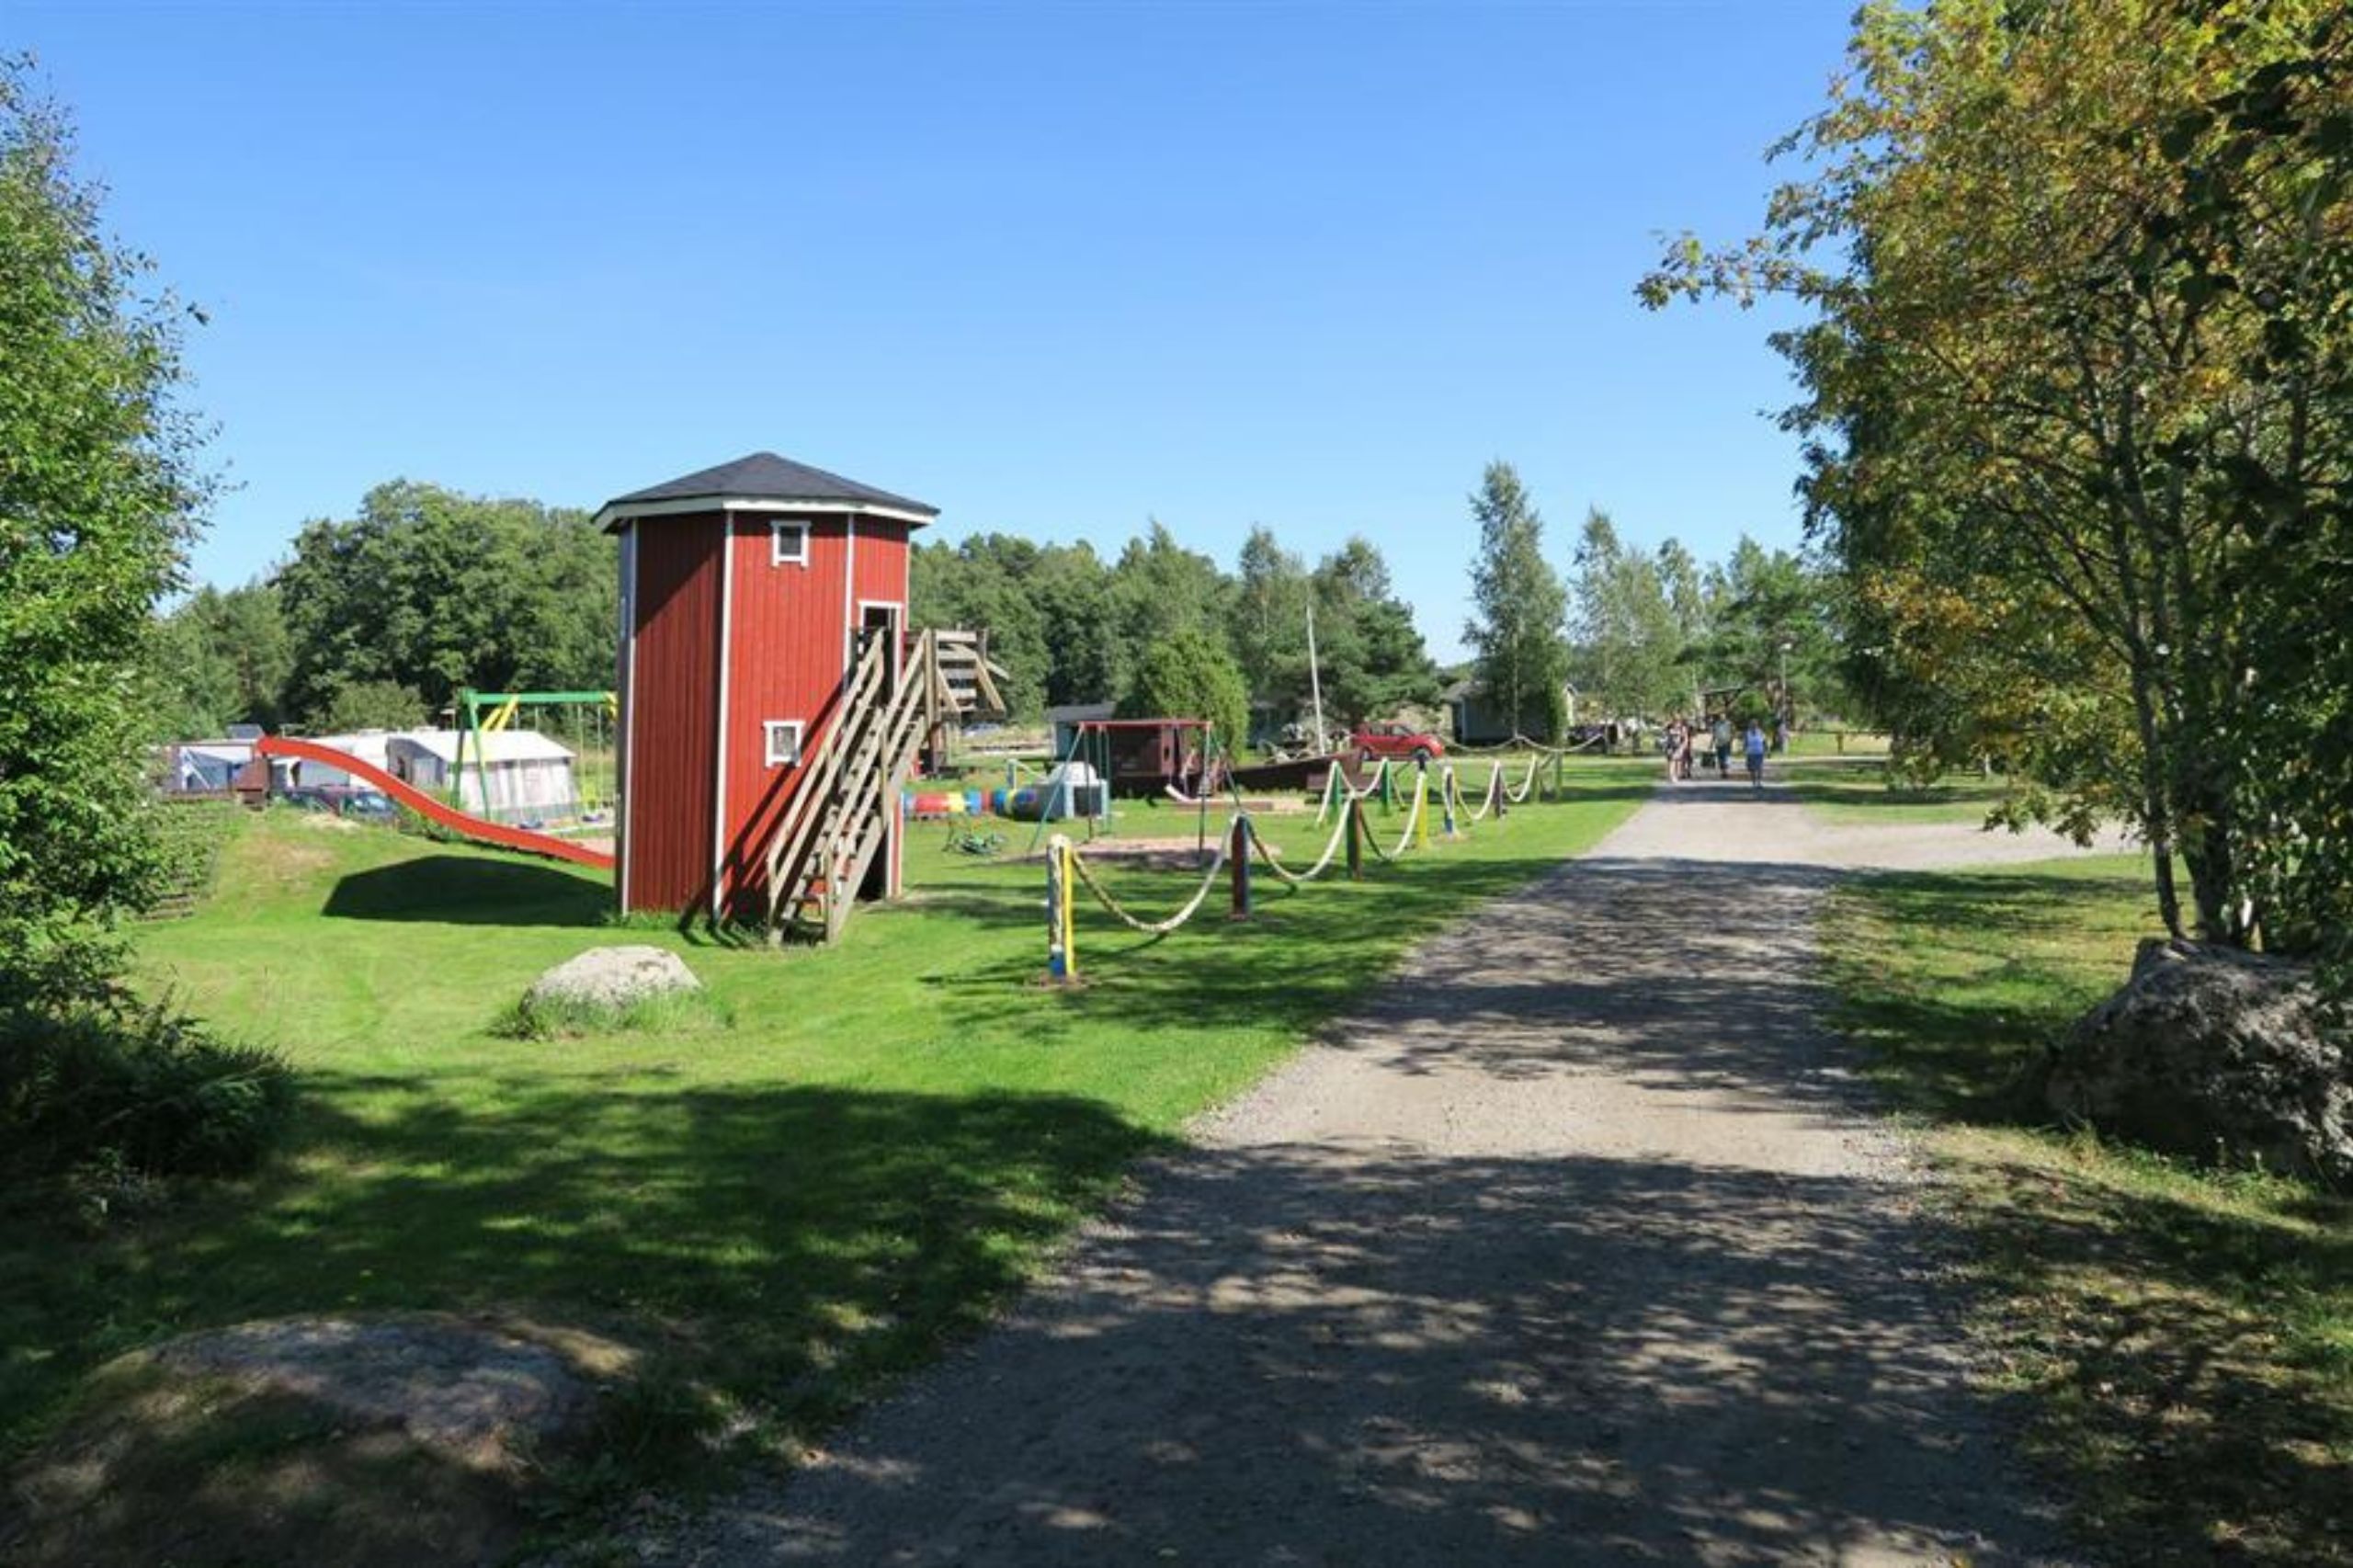 Ideal for all children and with guaranteed fun - the playground of Livonsaari Caravan in Finland is wonderful.